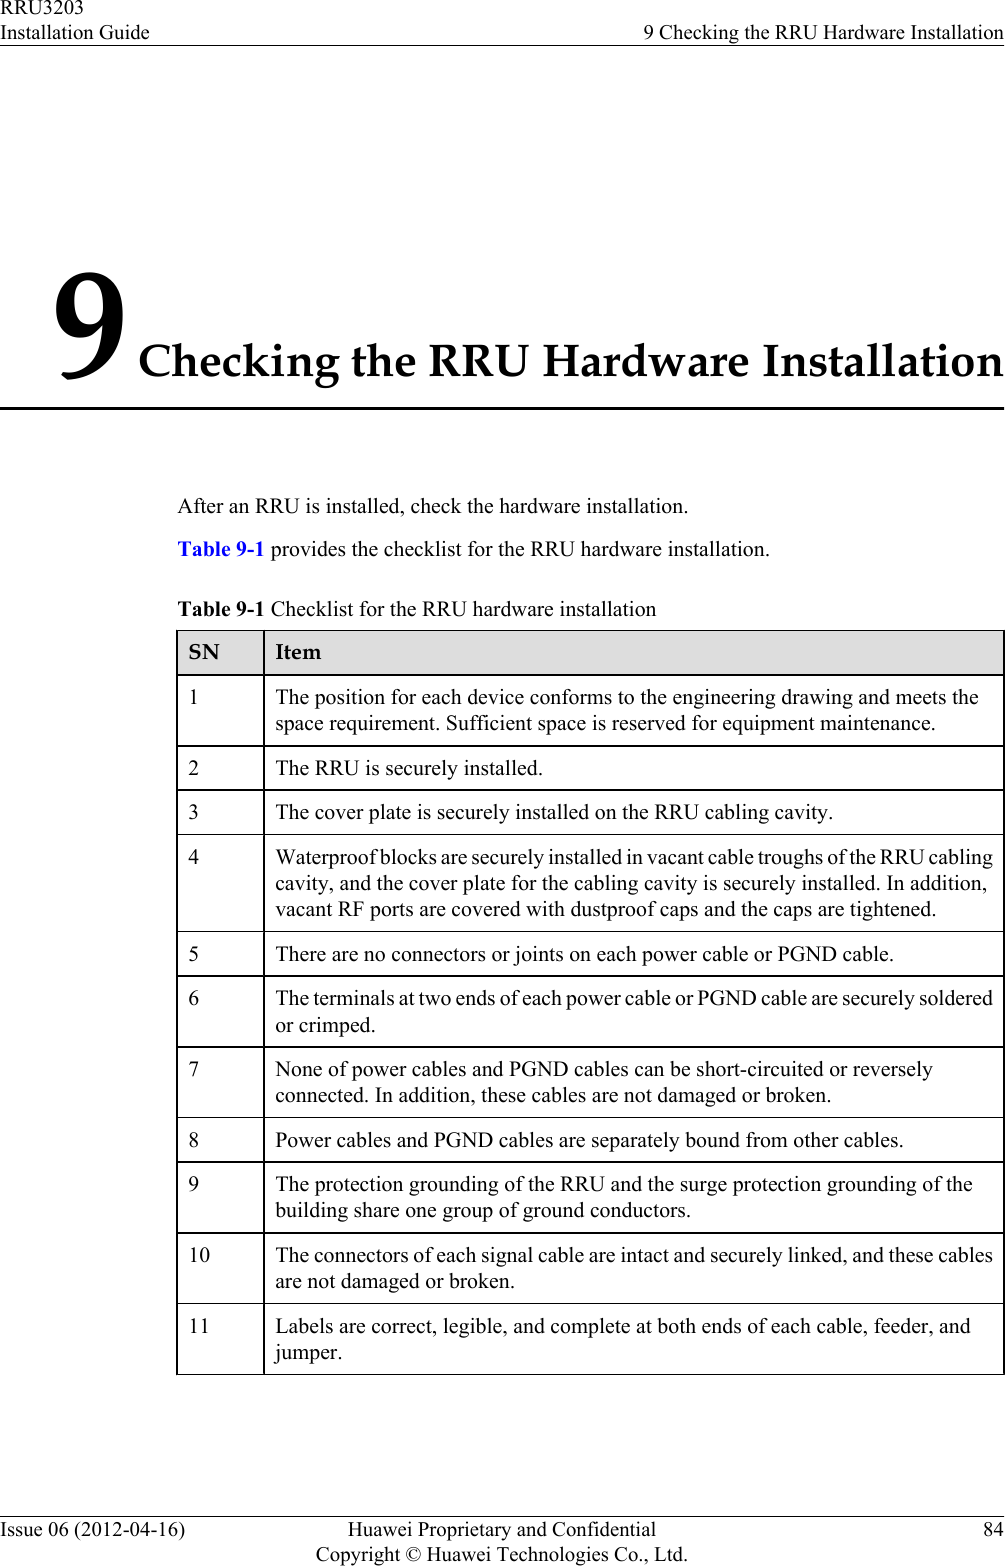 9 Checking the RRU Hardware InstallationAfter an RRU is installed, check the hardware installation.Table 9-1 provides the checklist for the RRU hardware installation.Table 9-1 Checklist for the RRU hardware installationSN Item1The position for each device conforms to the engineering drawing and meets thespace requirement. Sufficient space is reserved for equipment maintenance.2 The RRU is securely installed.3 The cover plate is securely installed on the RRU cabling cavity.4 Waterproof blocks are securely installed in vacant cable troughs of the RRU cablingcavity, and the cover plate for the cabling cavity is securely installed. In addition,vacant RF ports are covered with dustproof caps and the caps are tightened.5 There are no connectors or joints on each power cable or PGND cable.6 The terminals at two ends of each power cable or PGND cable are securely solderedor crimped.7 None of power cables and PGND cables can be short-circuited or reverselyconnected. In addition, these cables are not damaged or broken.8 Power cables and PGND cables are separately bound from other cables.9 The protection grounding of the RRU and the surge protection grounding of thebuilding share one group of ground conductors.10 The connectors of each signal cable are intact and securely linked, and these cablesare not damaged or broken.11 Labels are correct, legible, and complete at both ends of each cable, feeder, andjumper.RRU3203Installation Guide 9 Checking the RRU Hardware InstallationIssue 06 (2012-04-16) Huawei Proprietary and ConfidentialCopyright © Huawei Technologies Co., Ltd.84